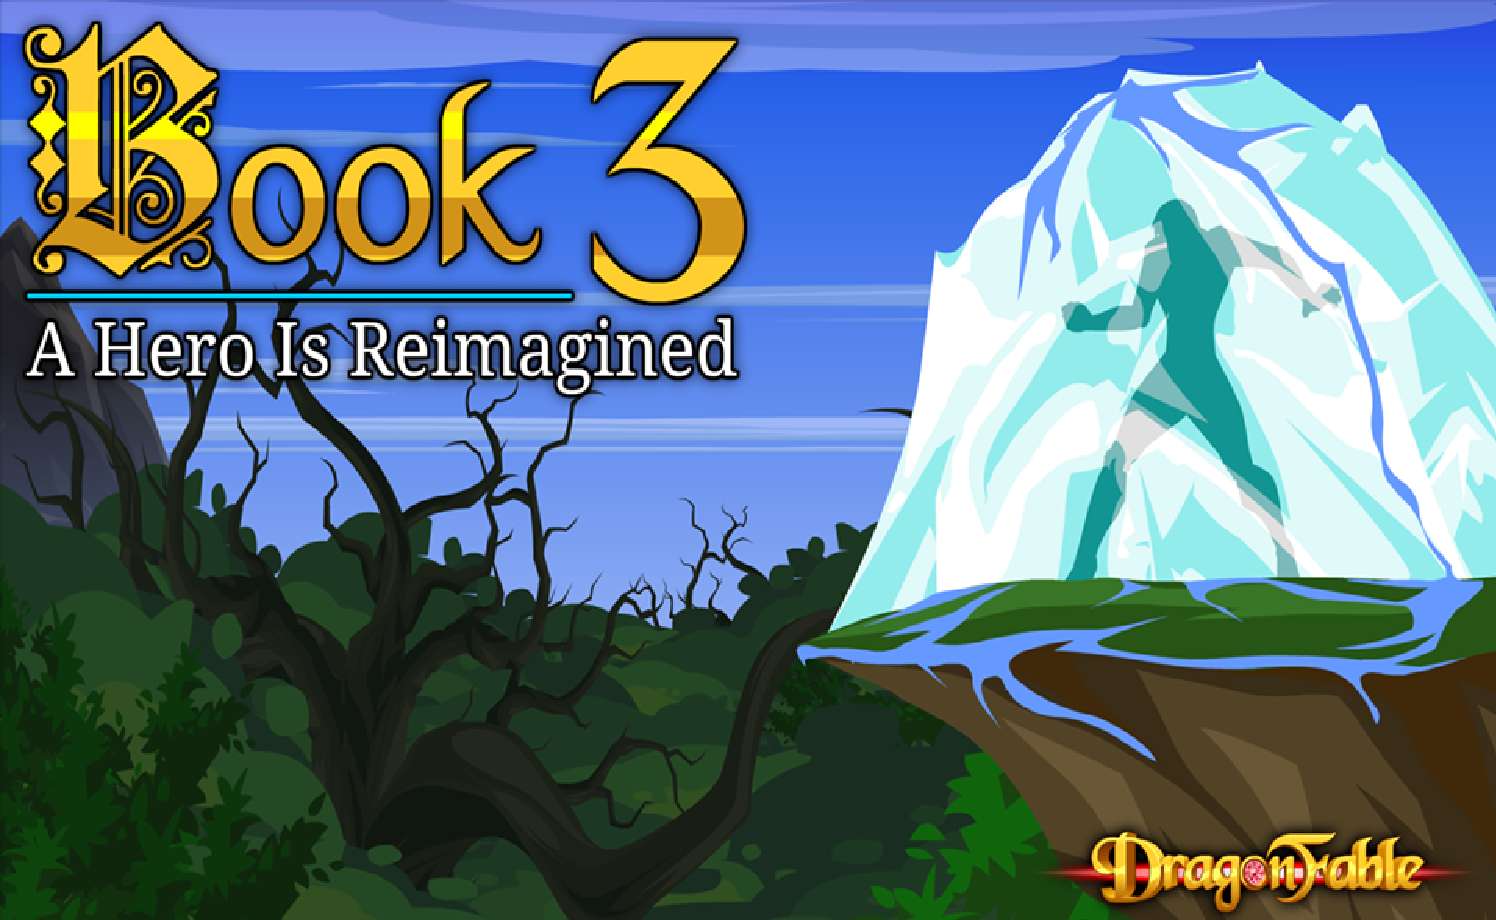 DragonFable Updates The Opening For Book 3 As Their Final Update For 2019